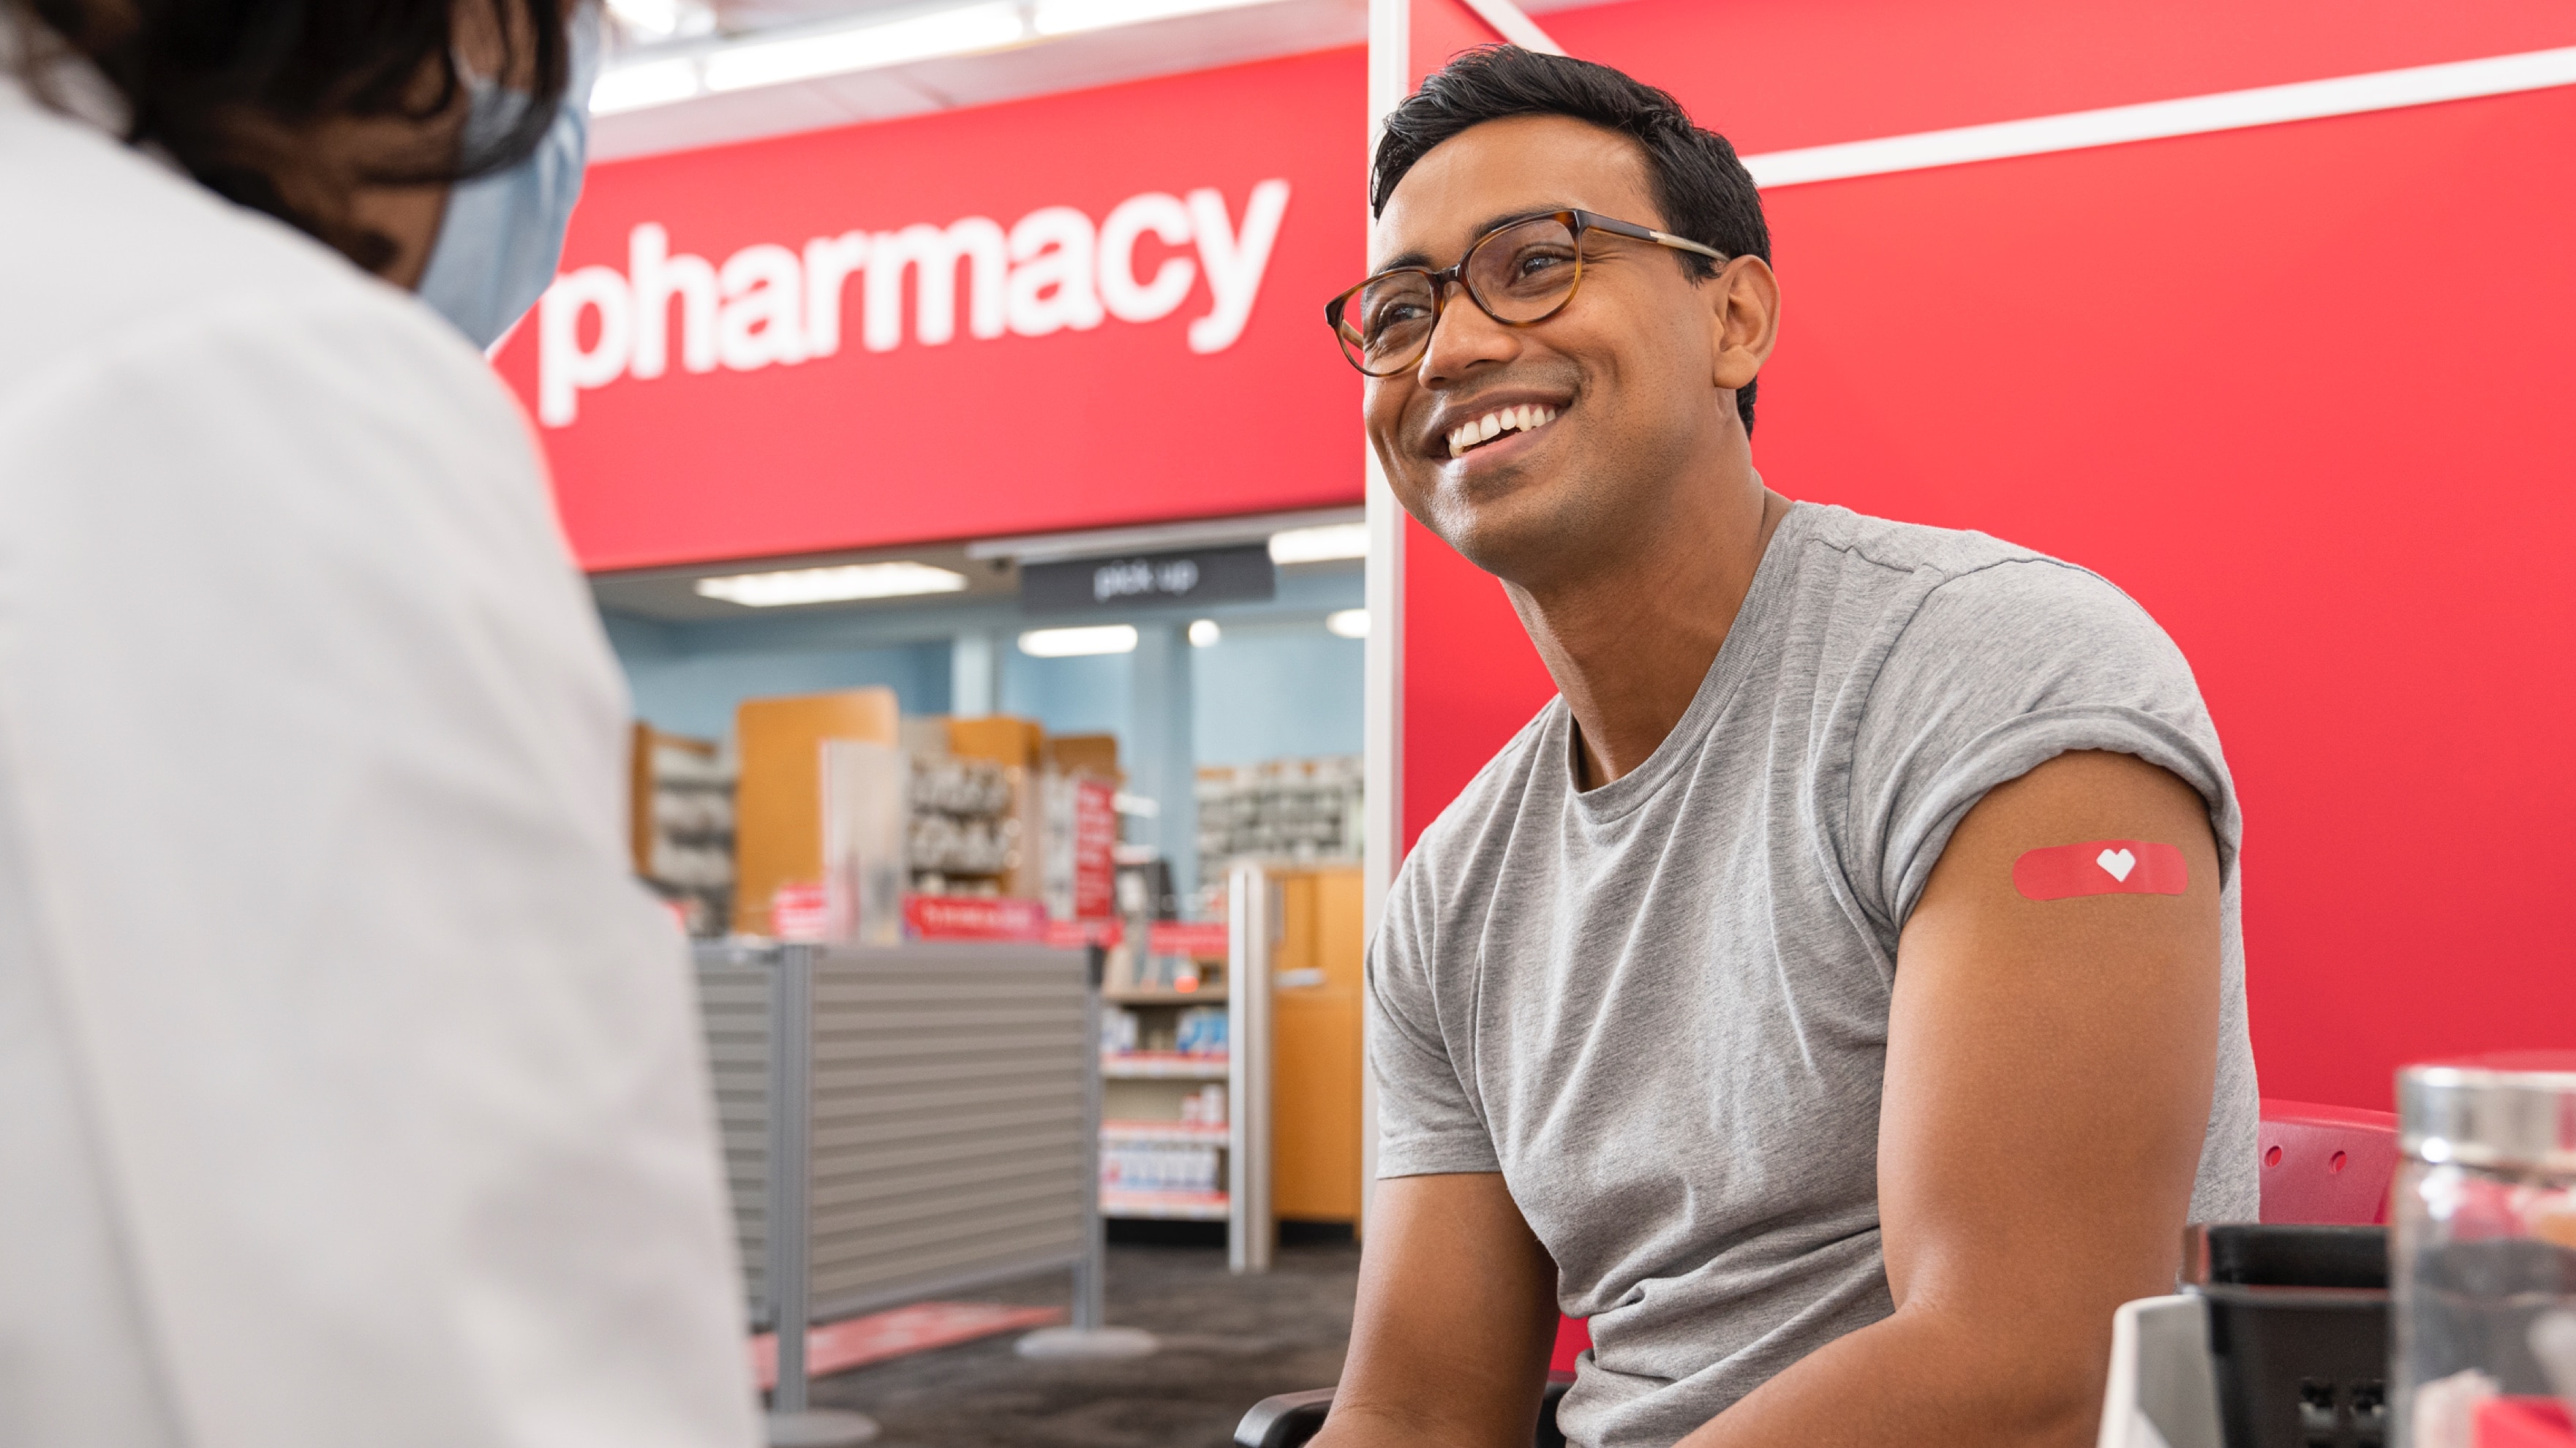 Smiling young man at pharmacy with red CVS bandage on arm after receiving vaccination